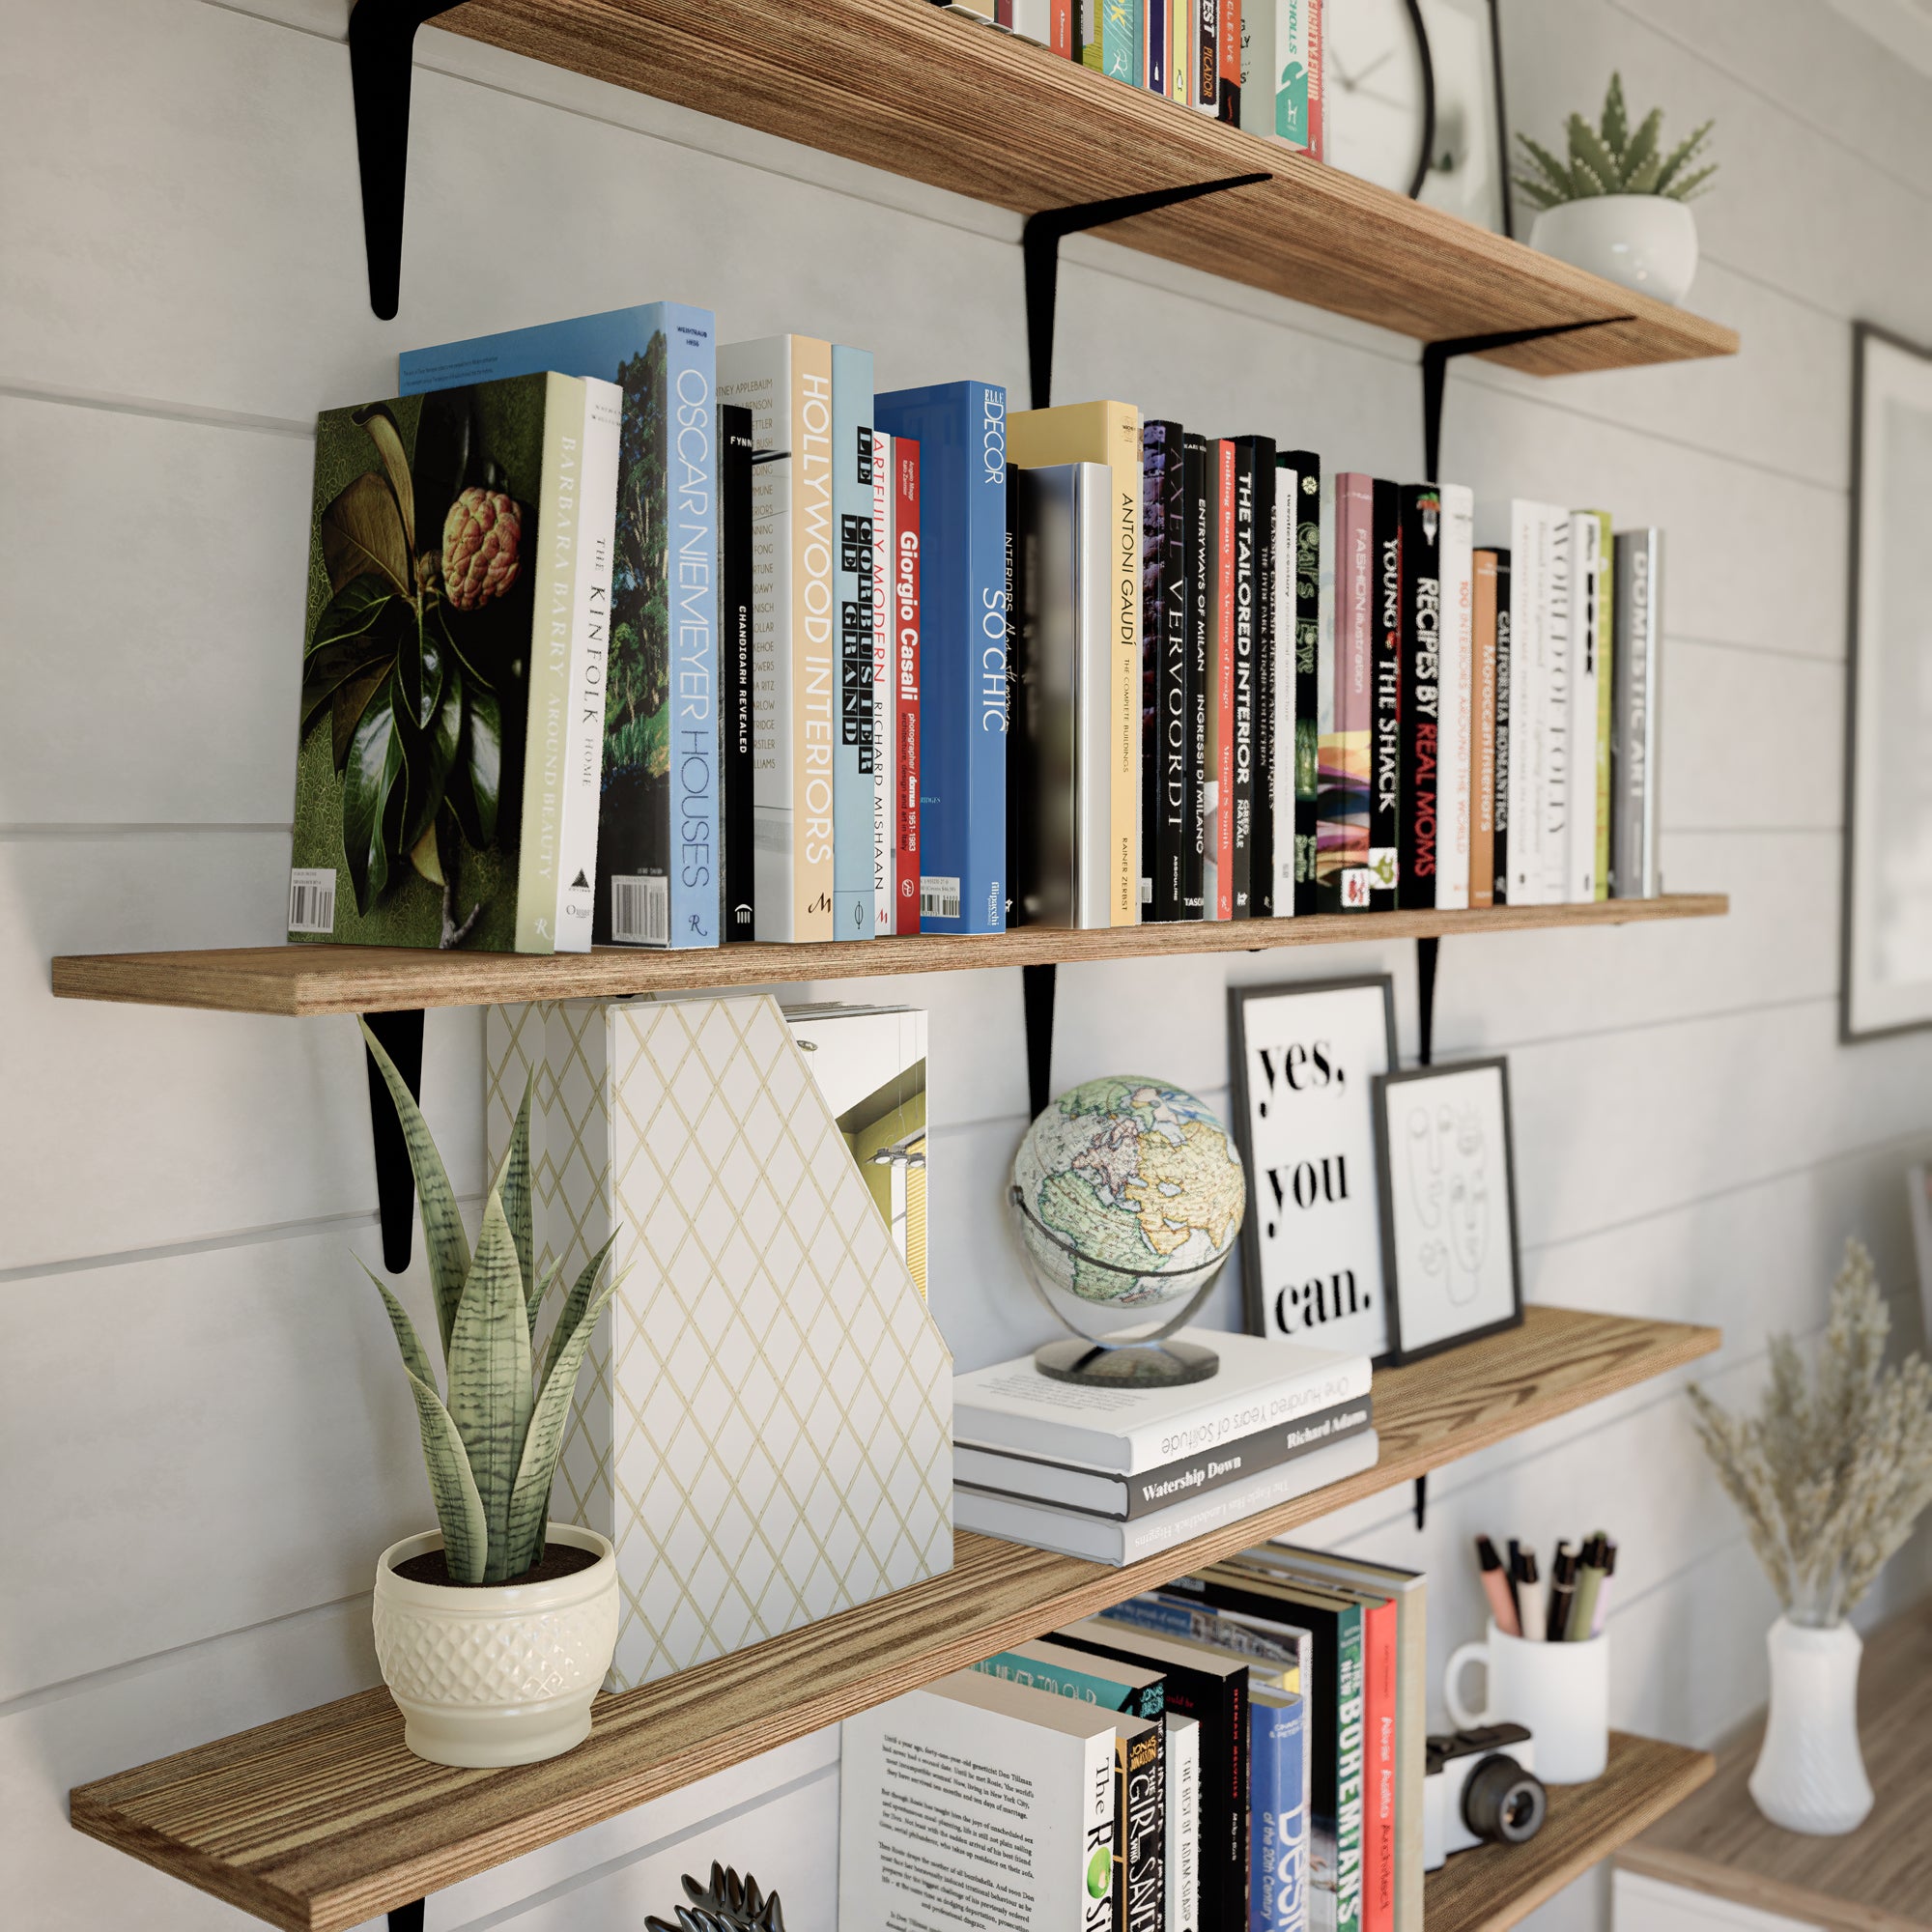 Home office with wall-mounted shelves supported by black metal brackets for books and decor.